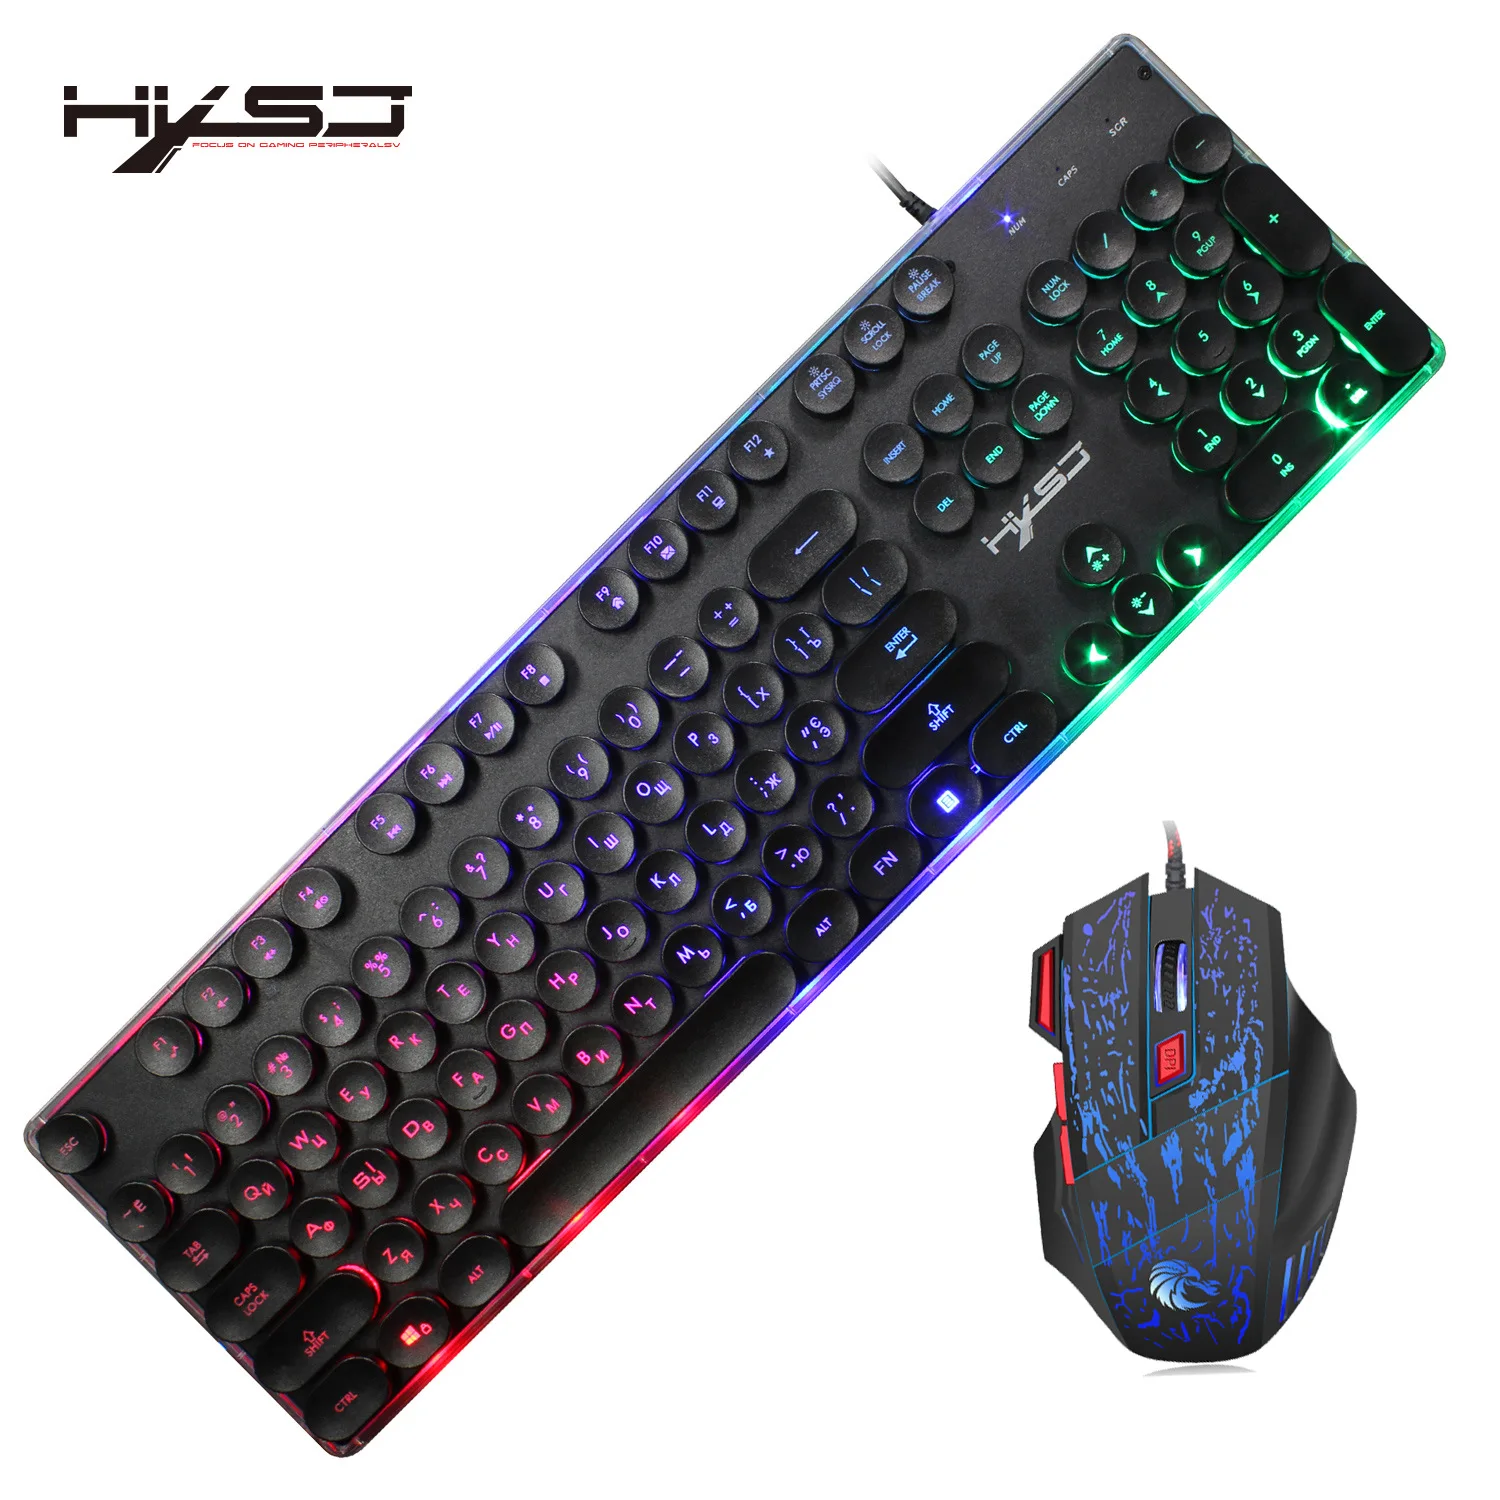 

HXSJ J40E Russian Gamer Keyboard Mouse Set 104 Keys Colorful Backlight Wired Keyboard Gaming Accessories for PC Desktop Game